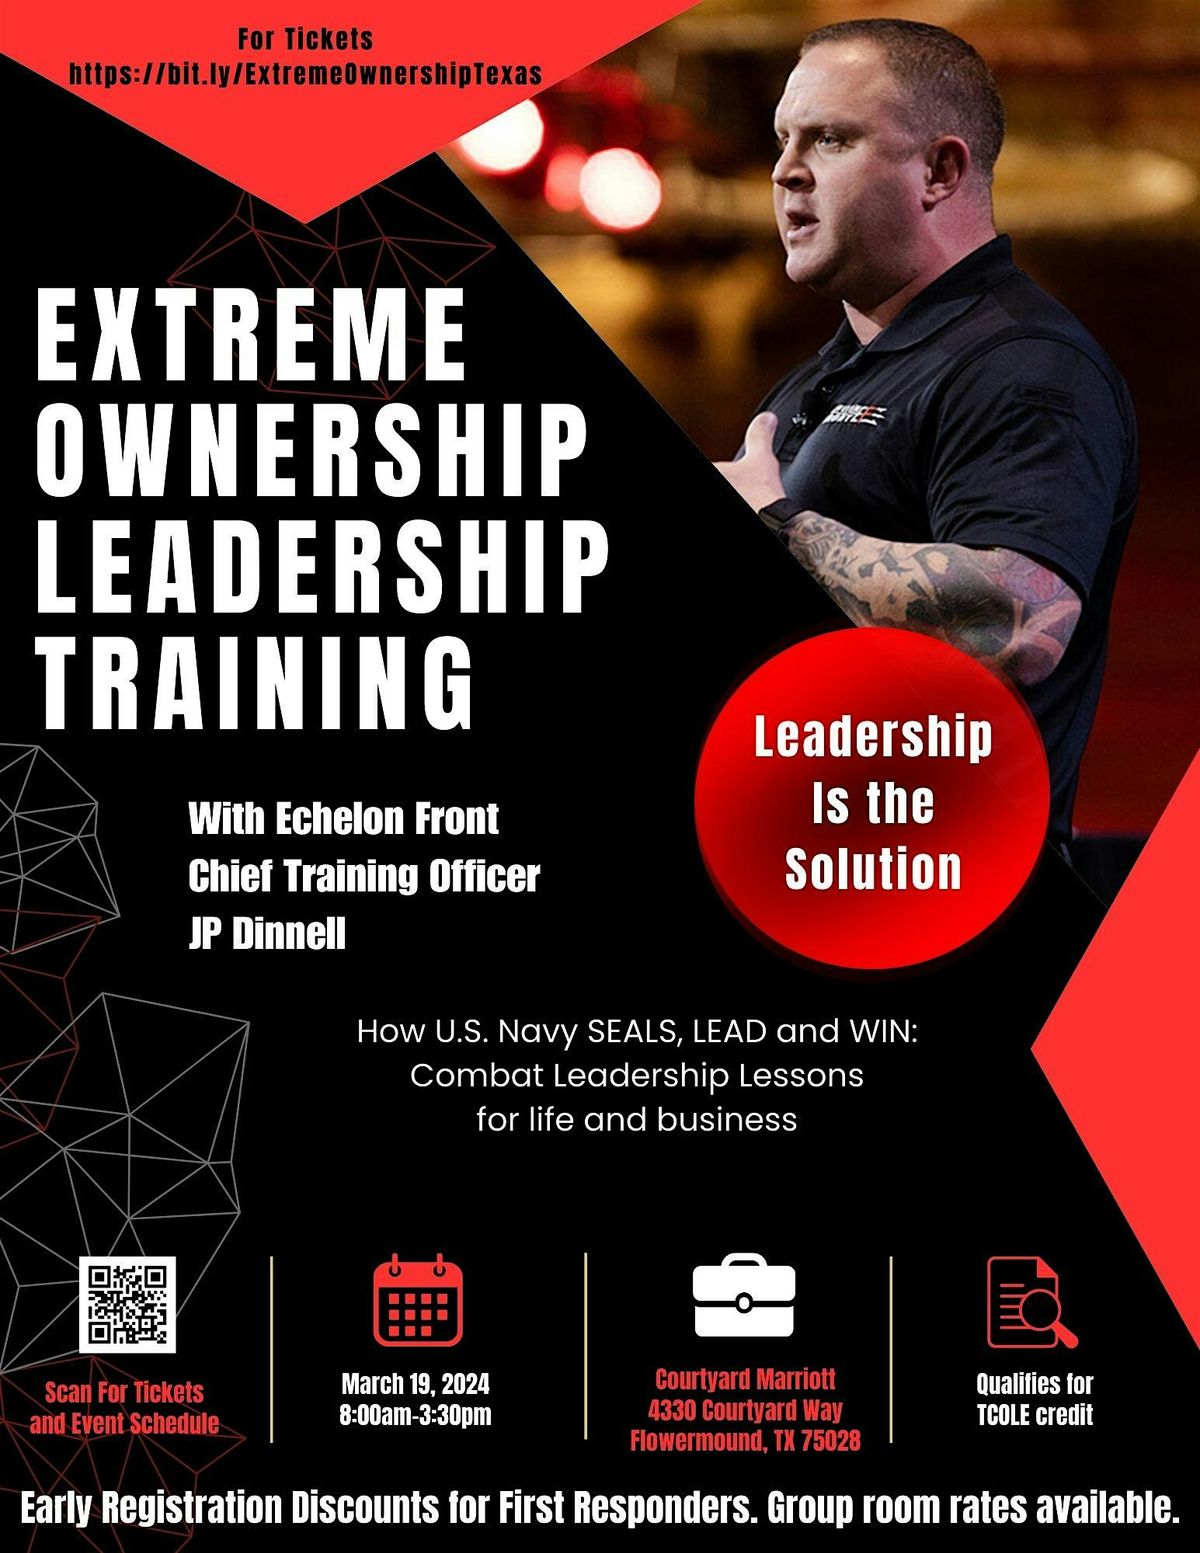 Extreme Ownership Leadership Training for Business and Life with JP Dinnell